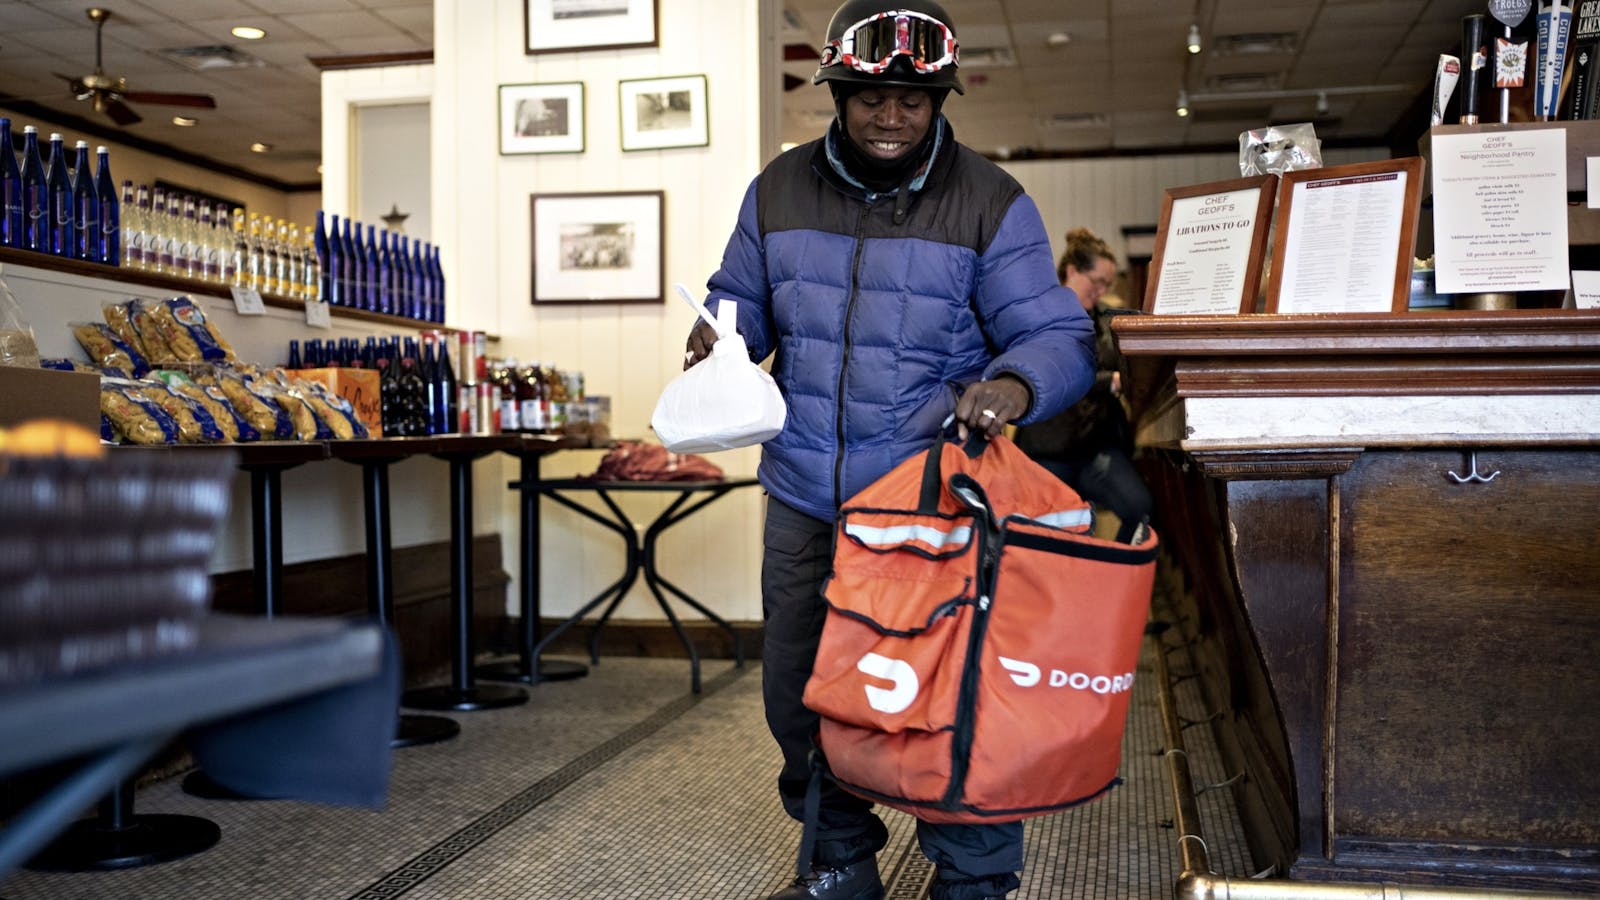 A DoorDash delivery person. Photo by Bloomberg